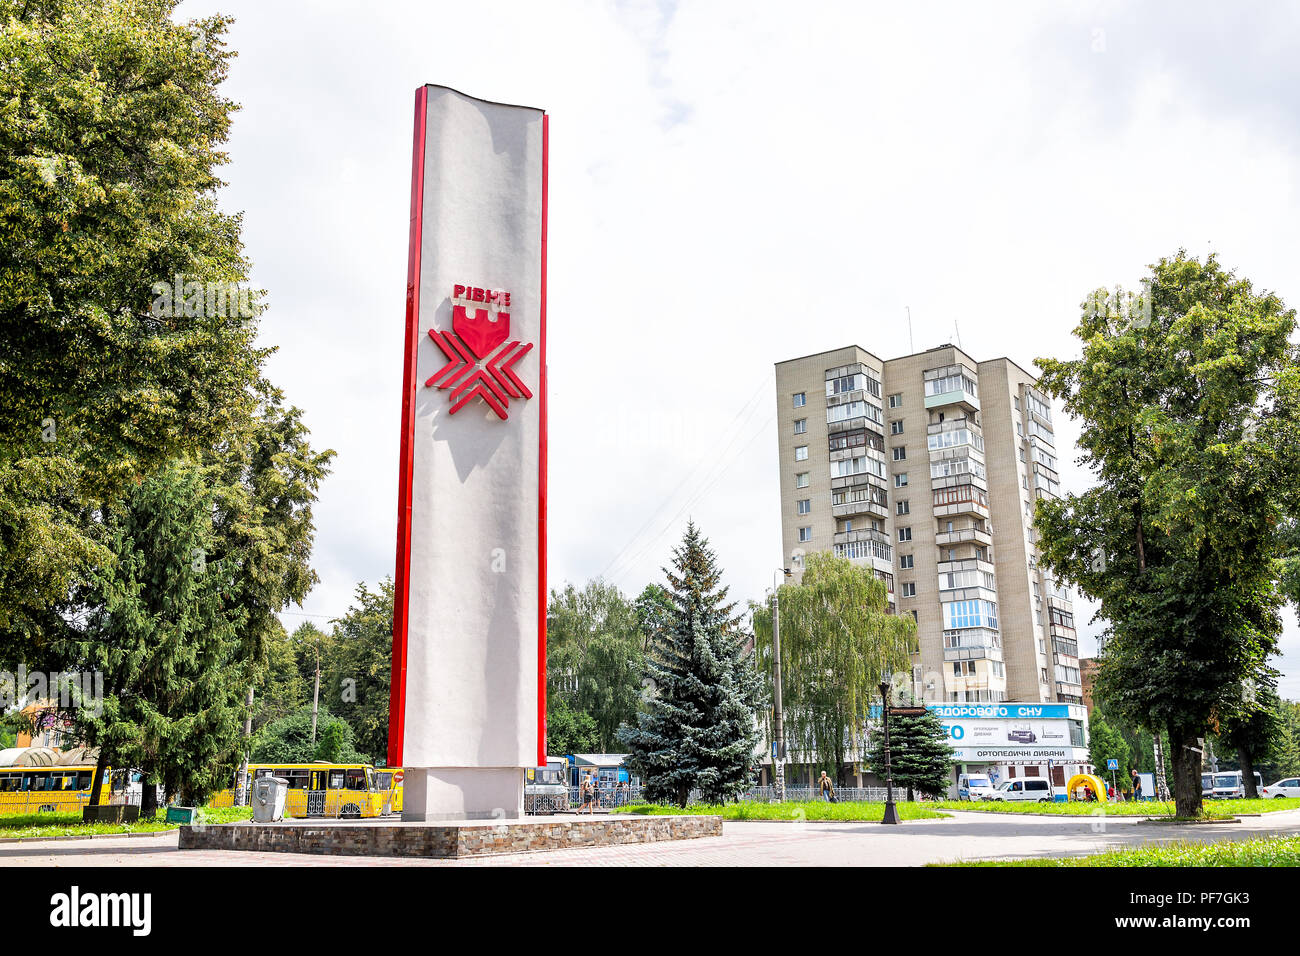 Rivne, Ukraine - July 25, 2018: Red monument sign for Rovno city in western Ukraine by railway railroad rail train station in outdoor park in summer Stock Photo